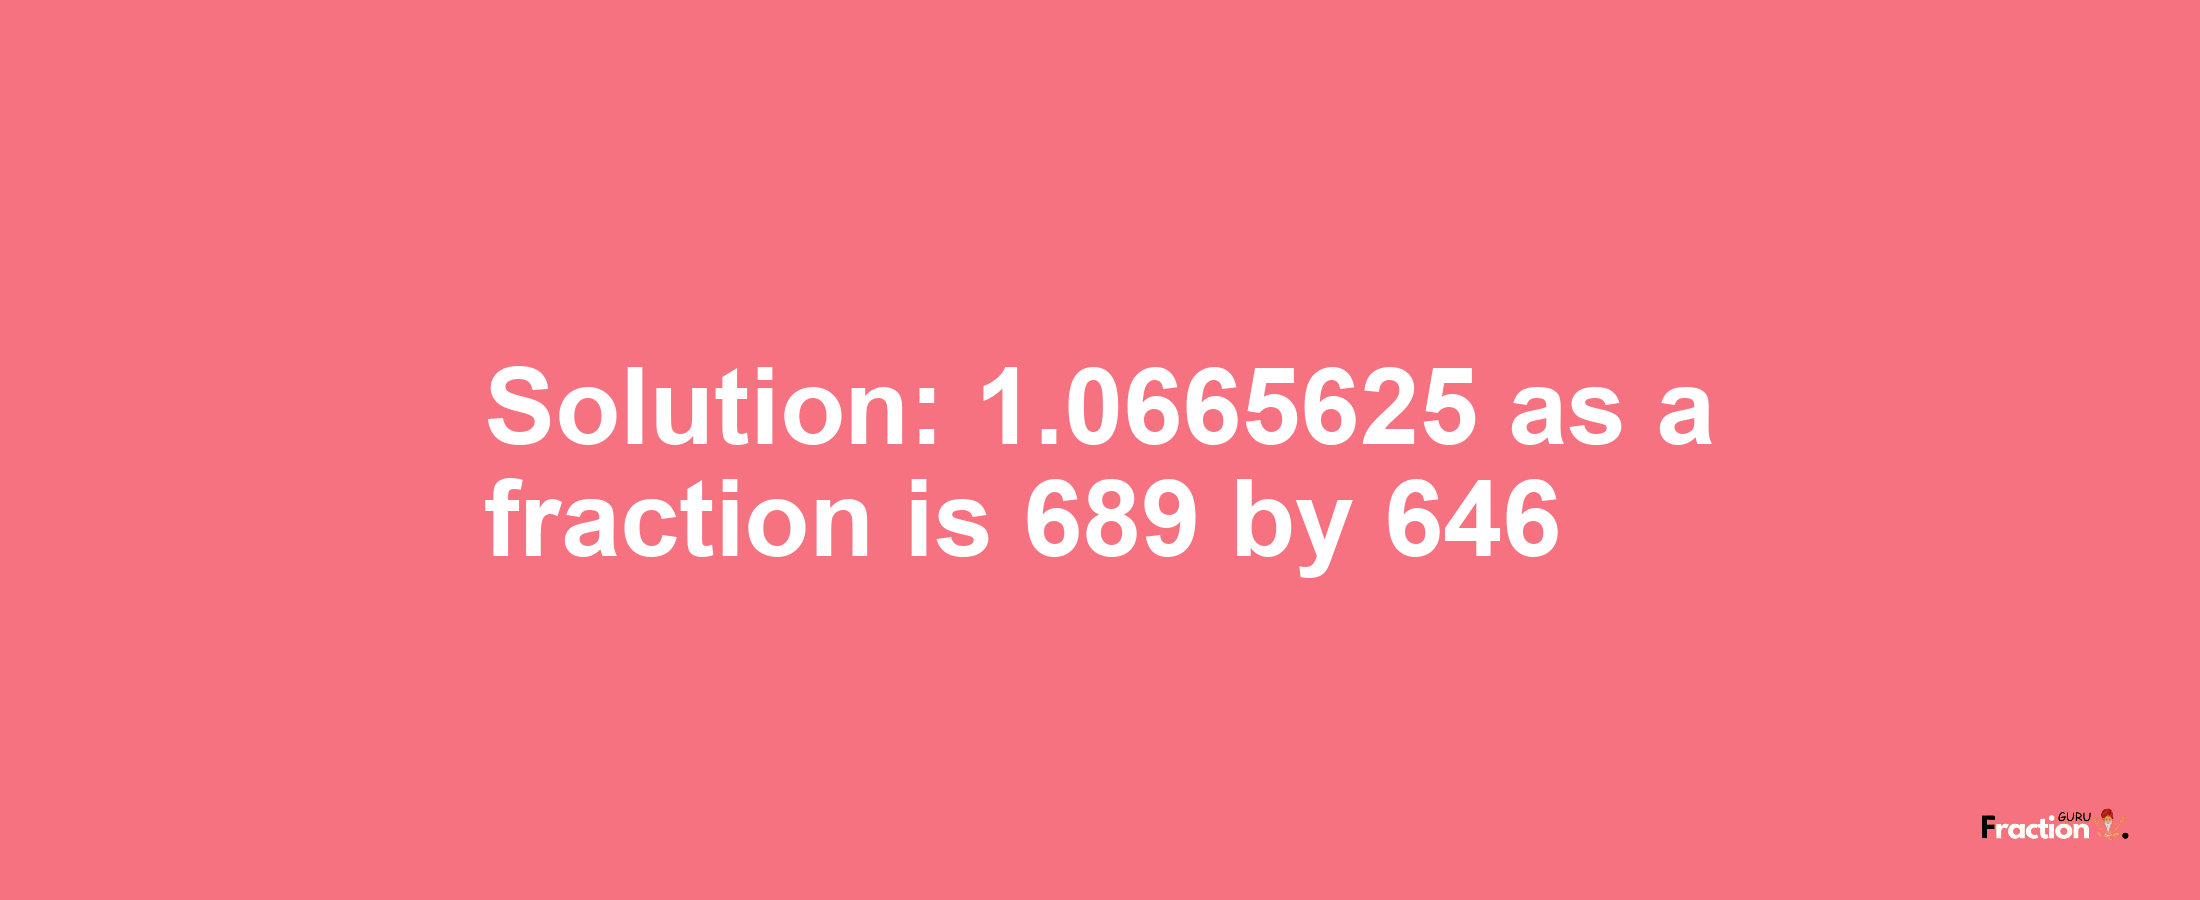 Solution:1.0665625 as a fraction is 689/646